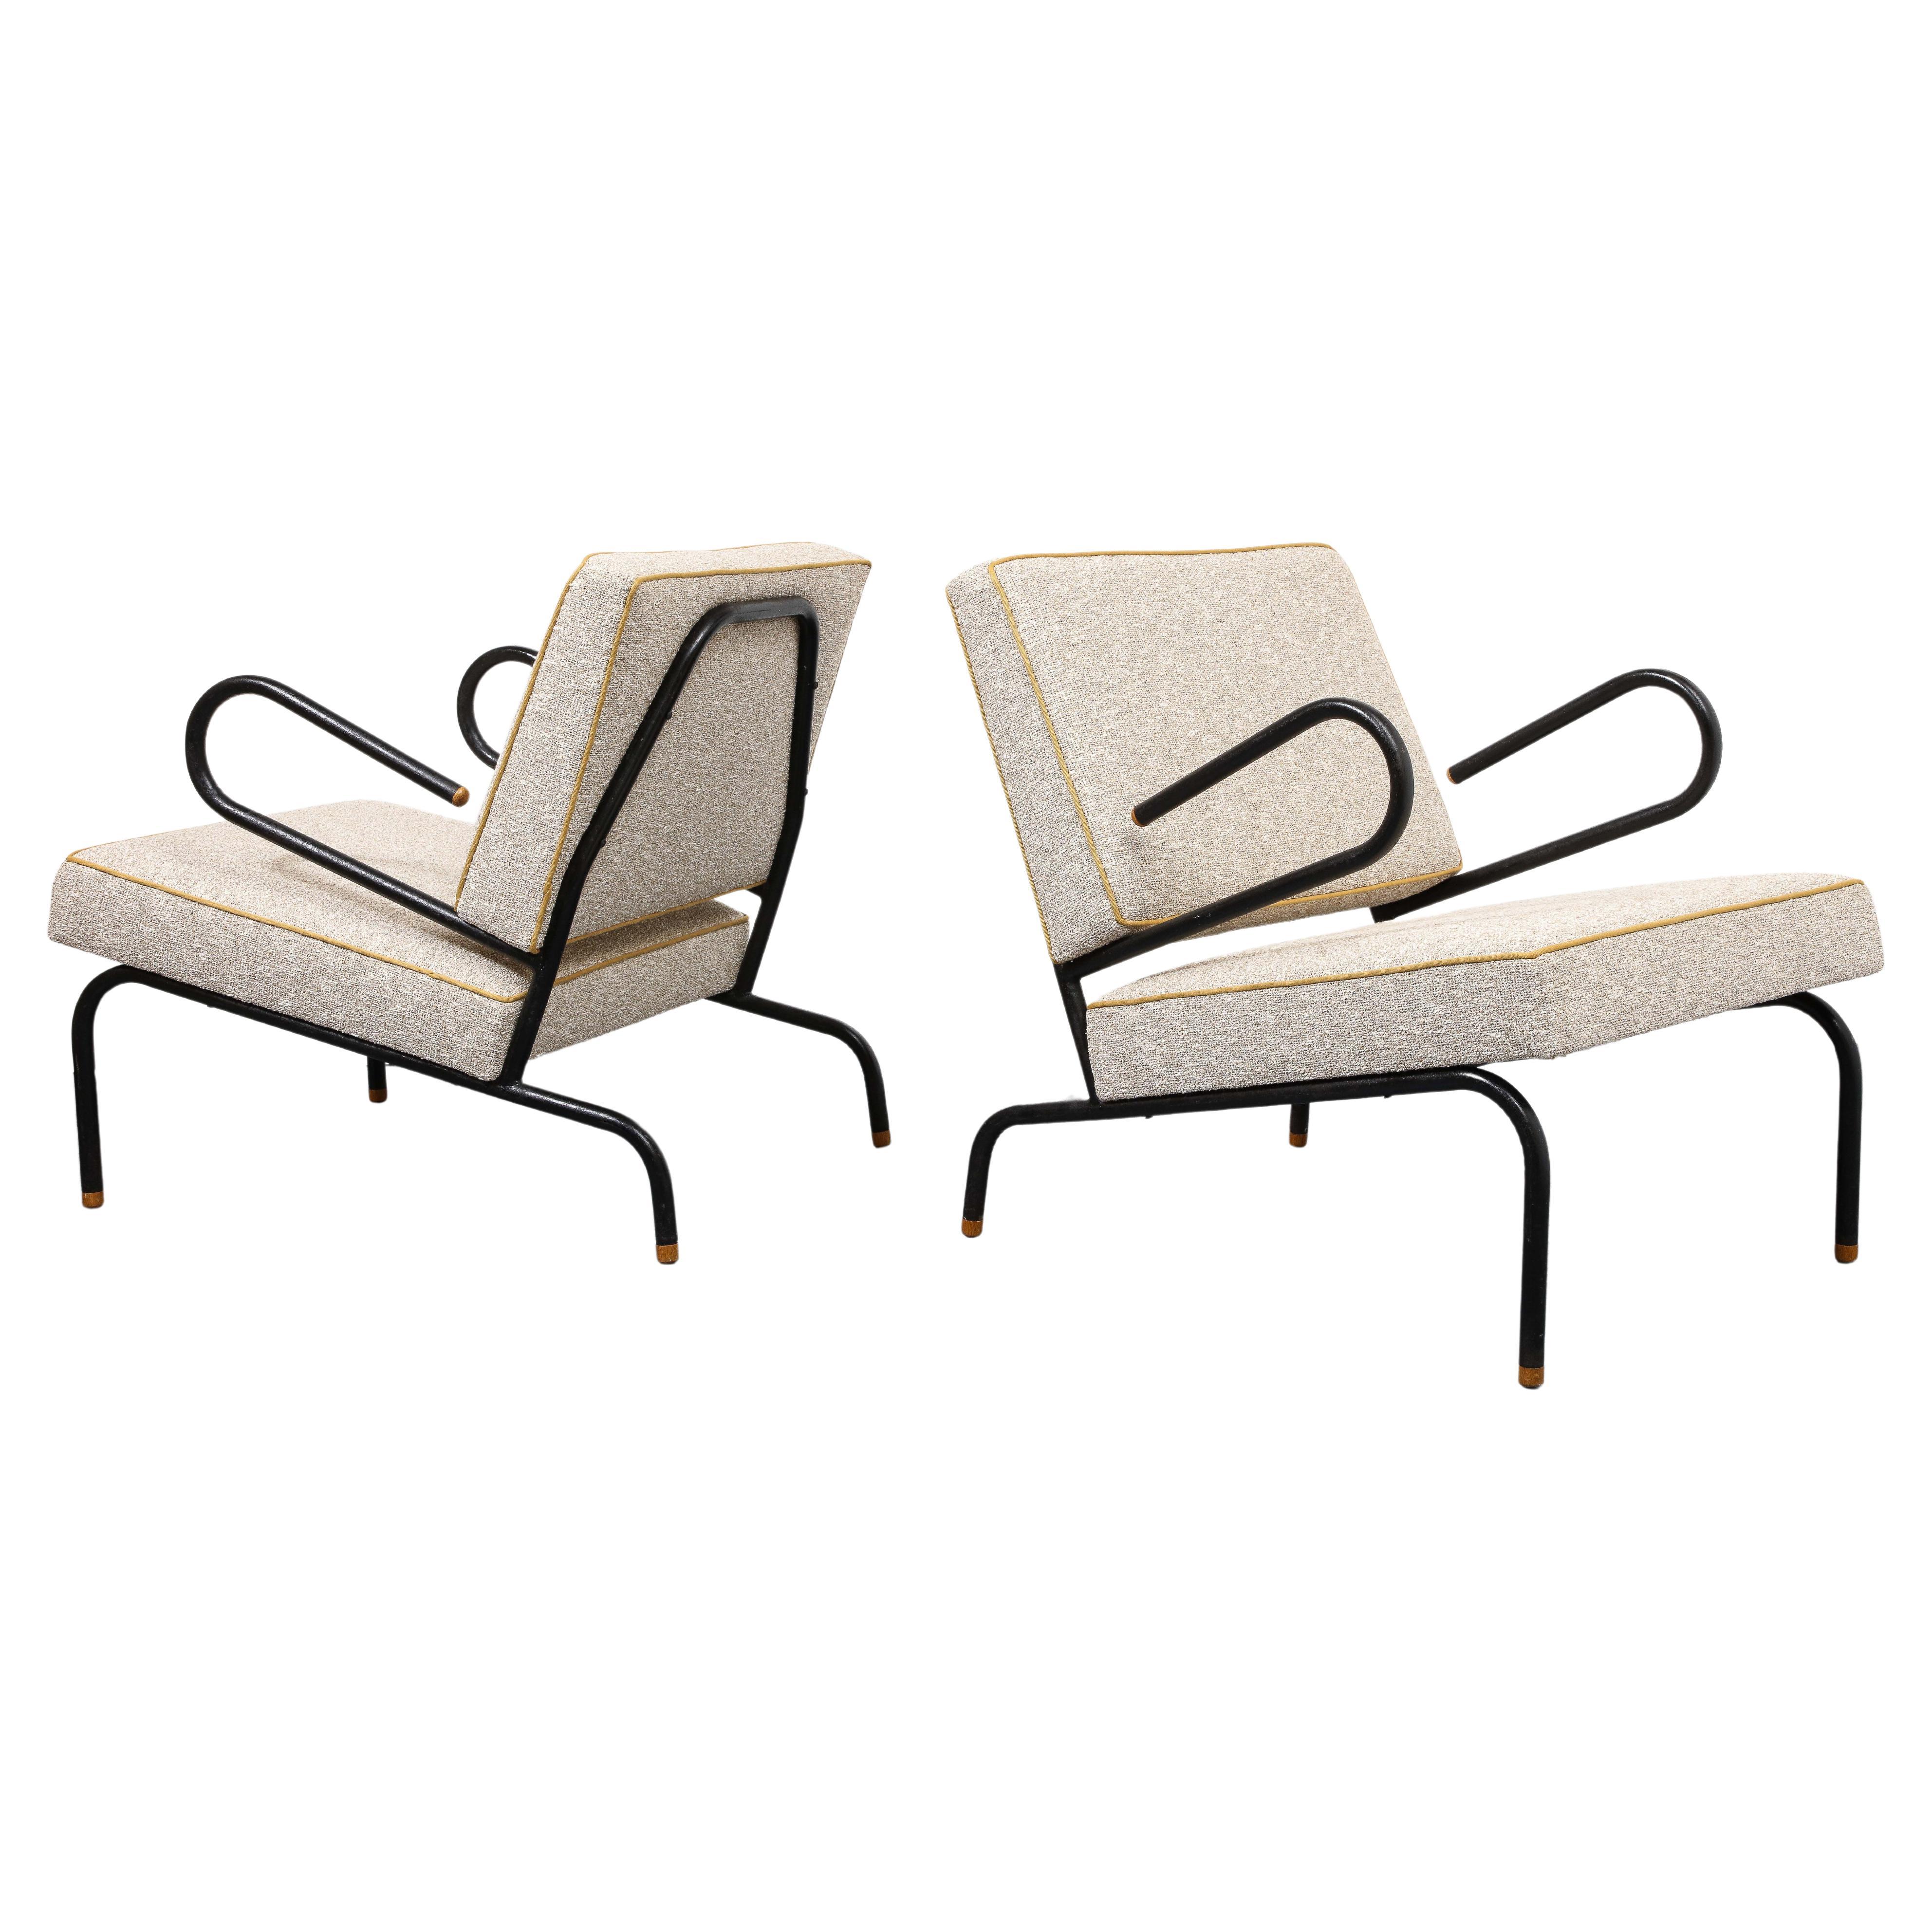 Bent Steel Lounge Chair by Jacques Hitier for Tubauto, France, c. 1955